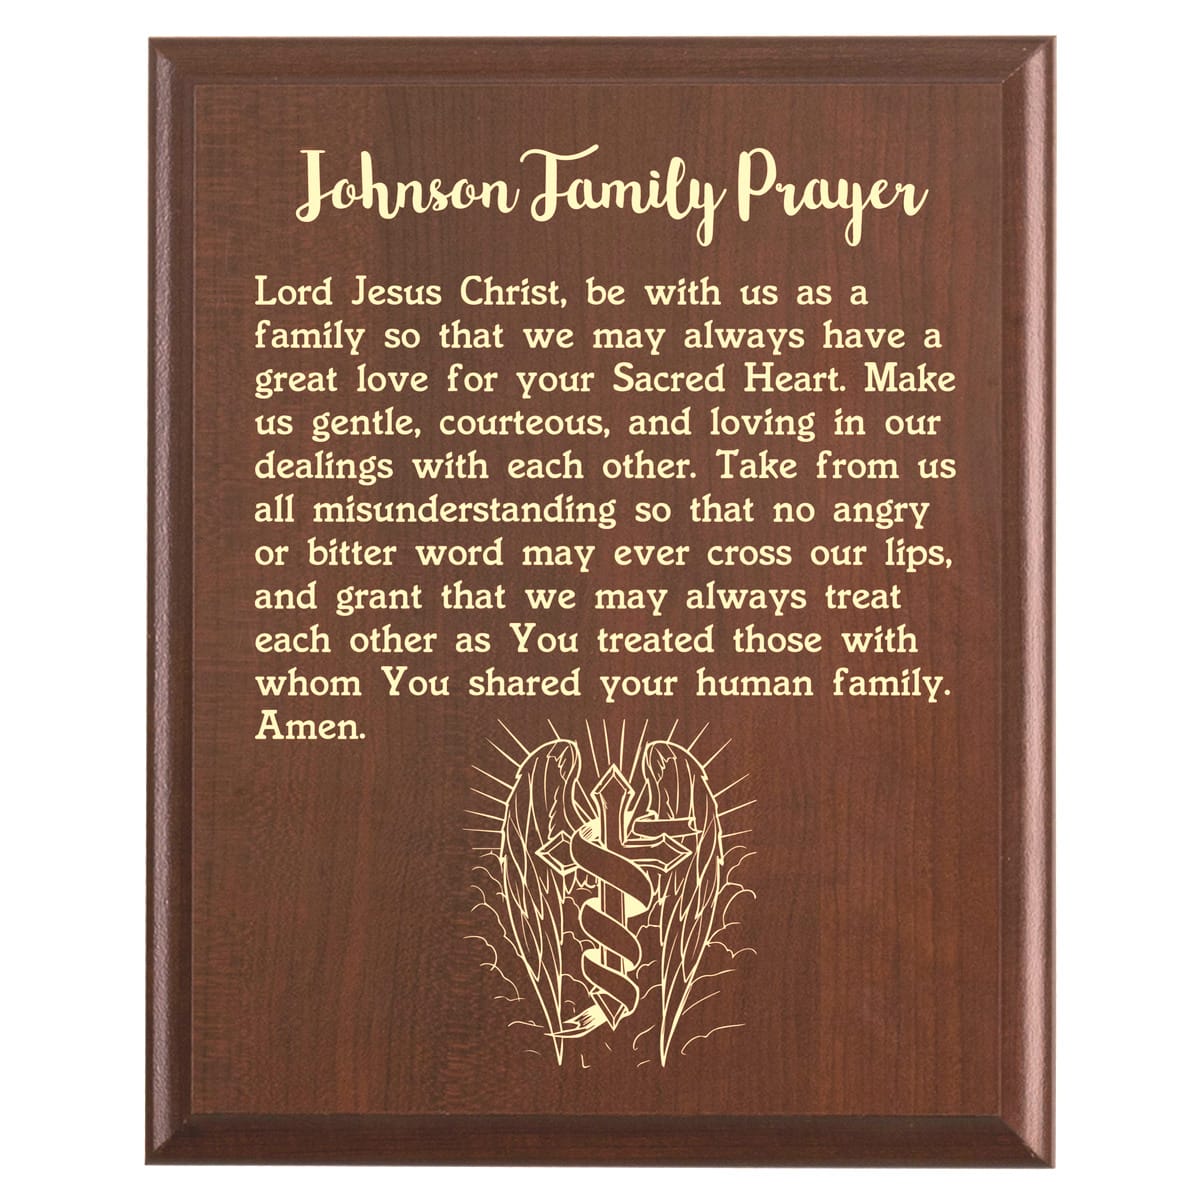 Plaque photo: Family Prayer Plaque design with free personalization. Wood style finish with customized text.